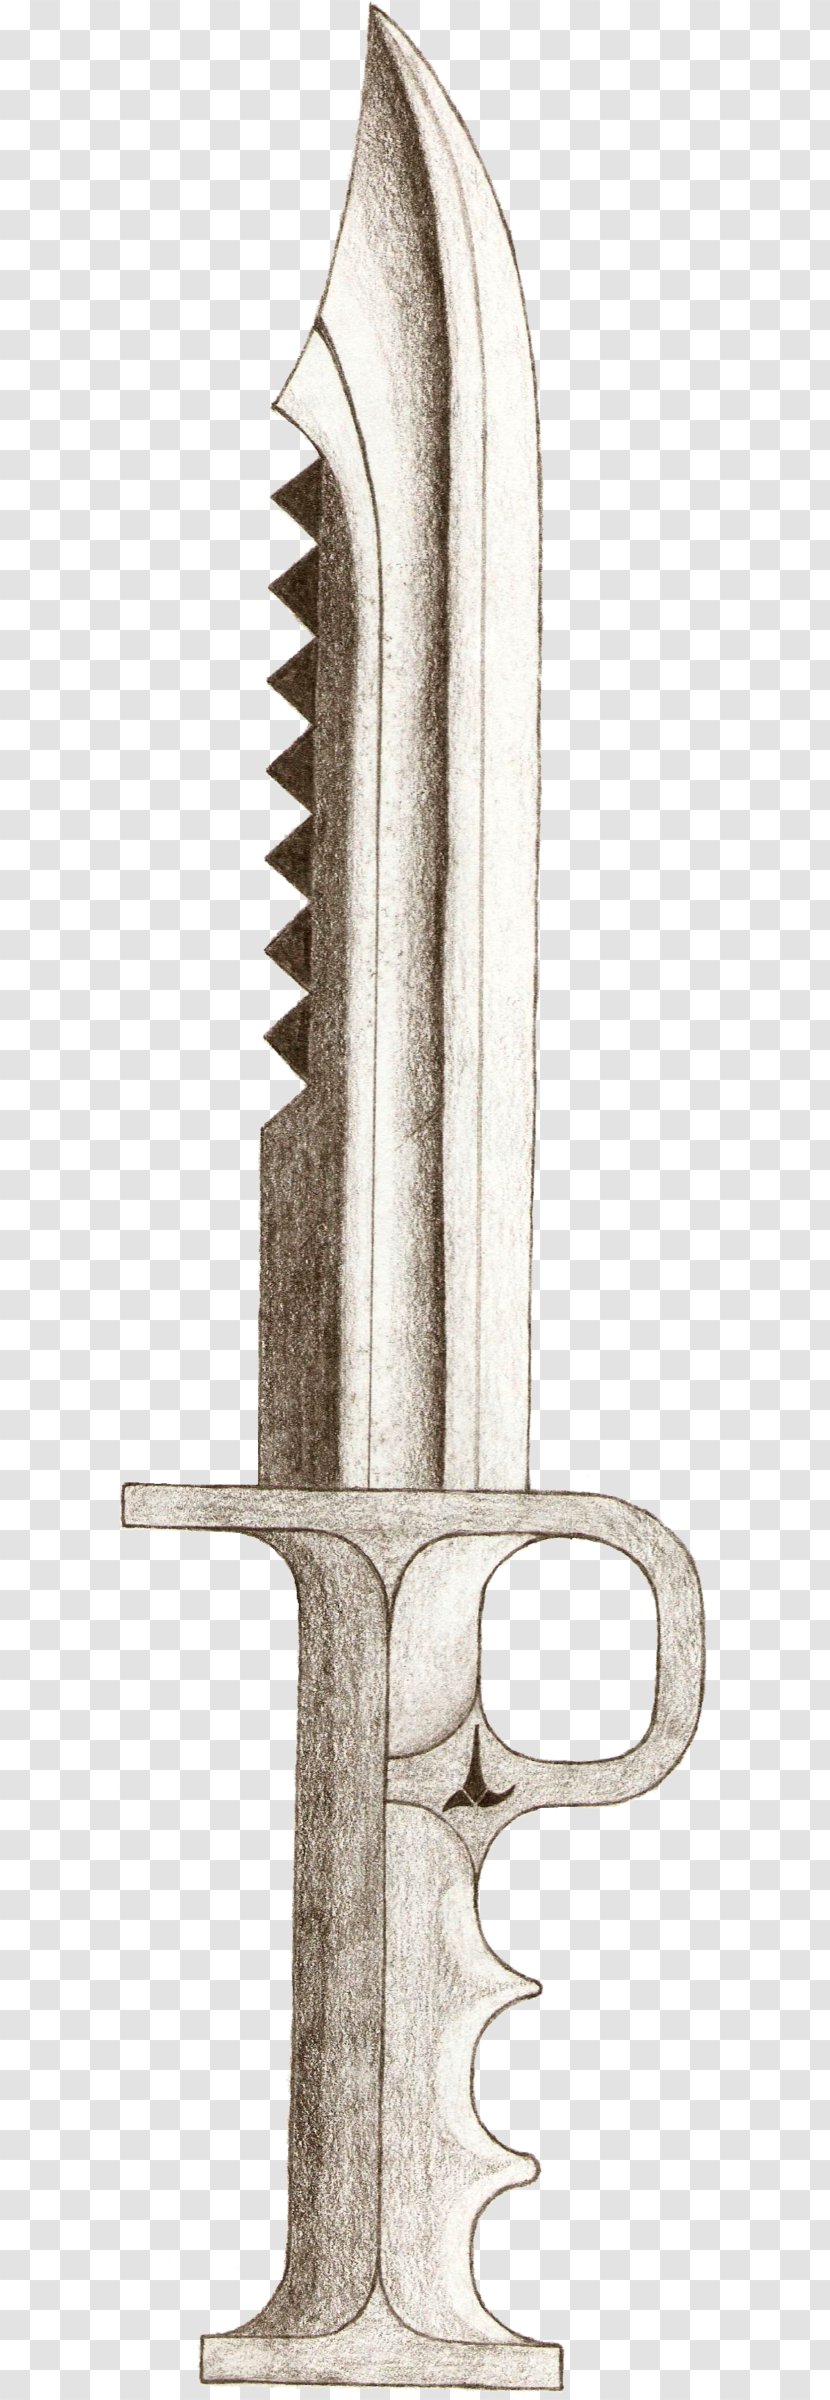 Sword Angle Font - Cold Weapon Transparent PNG